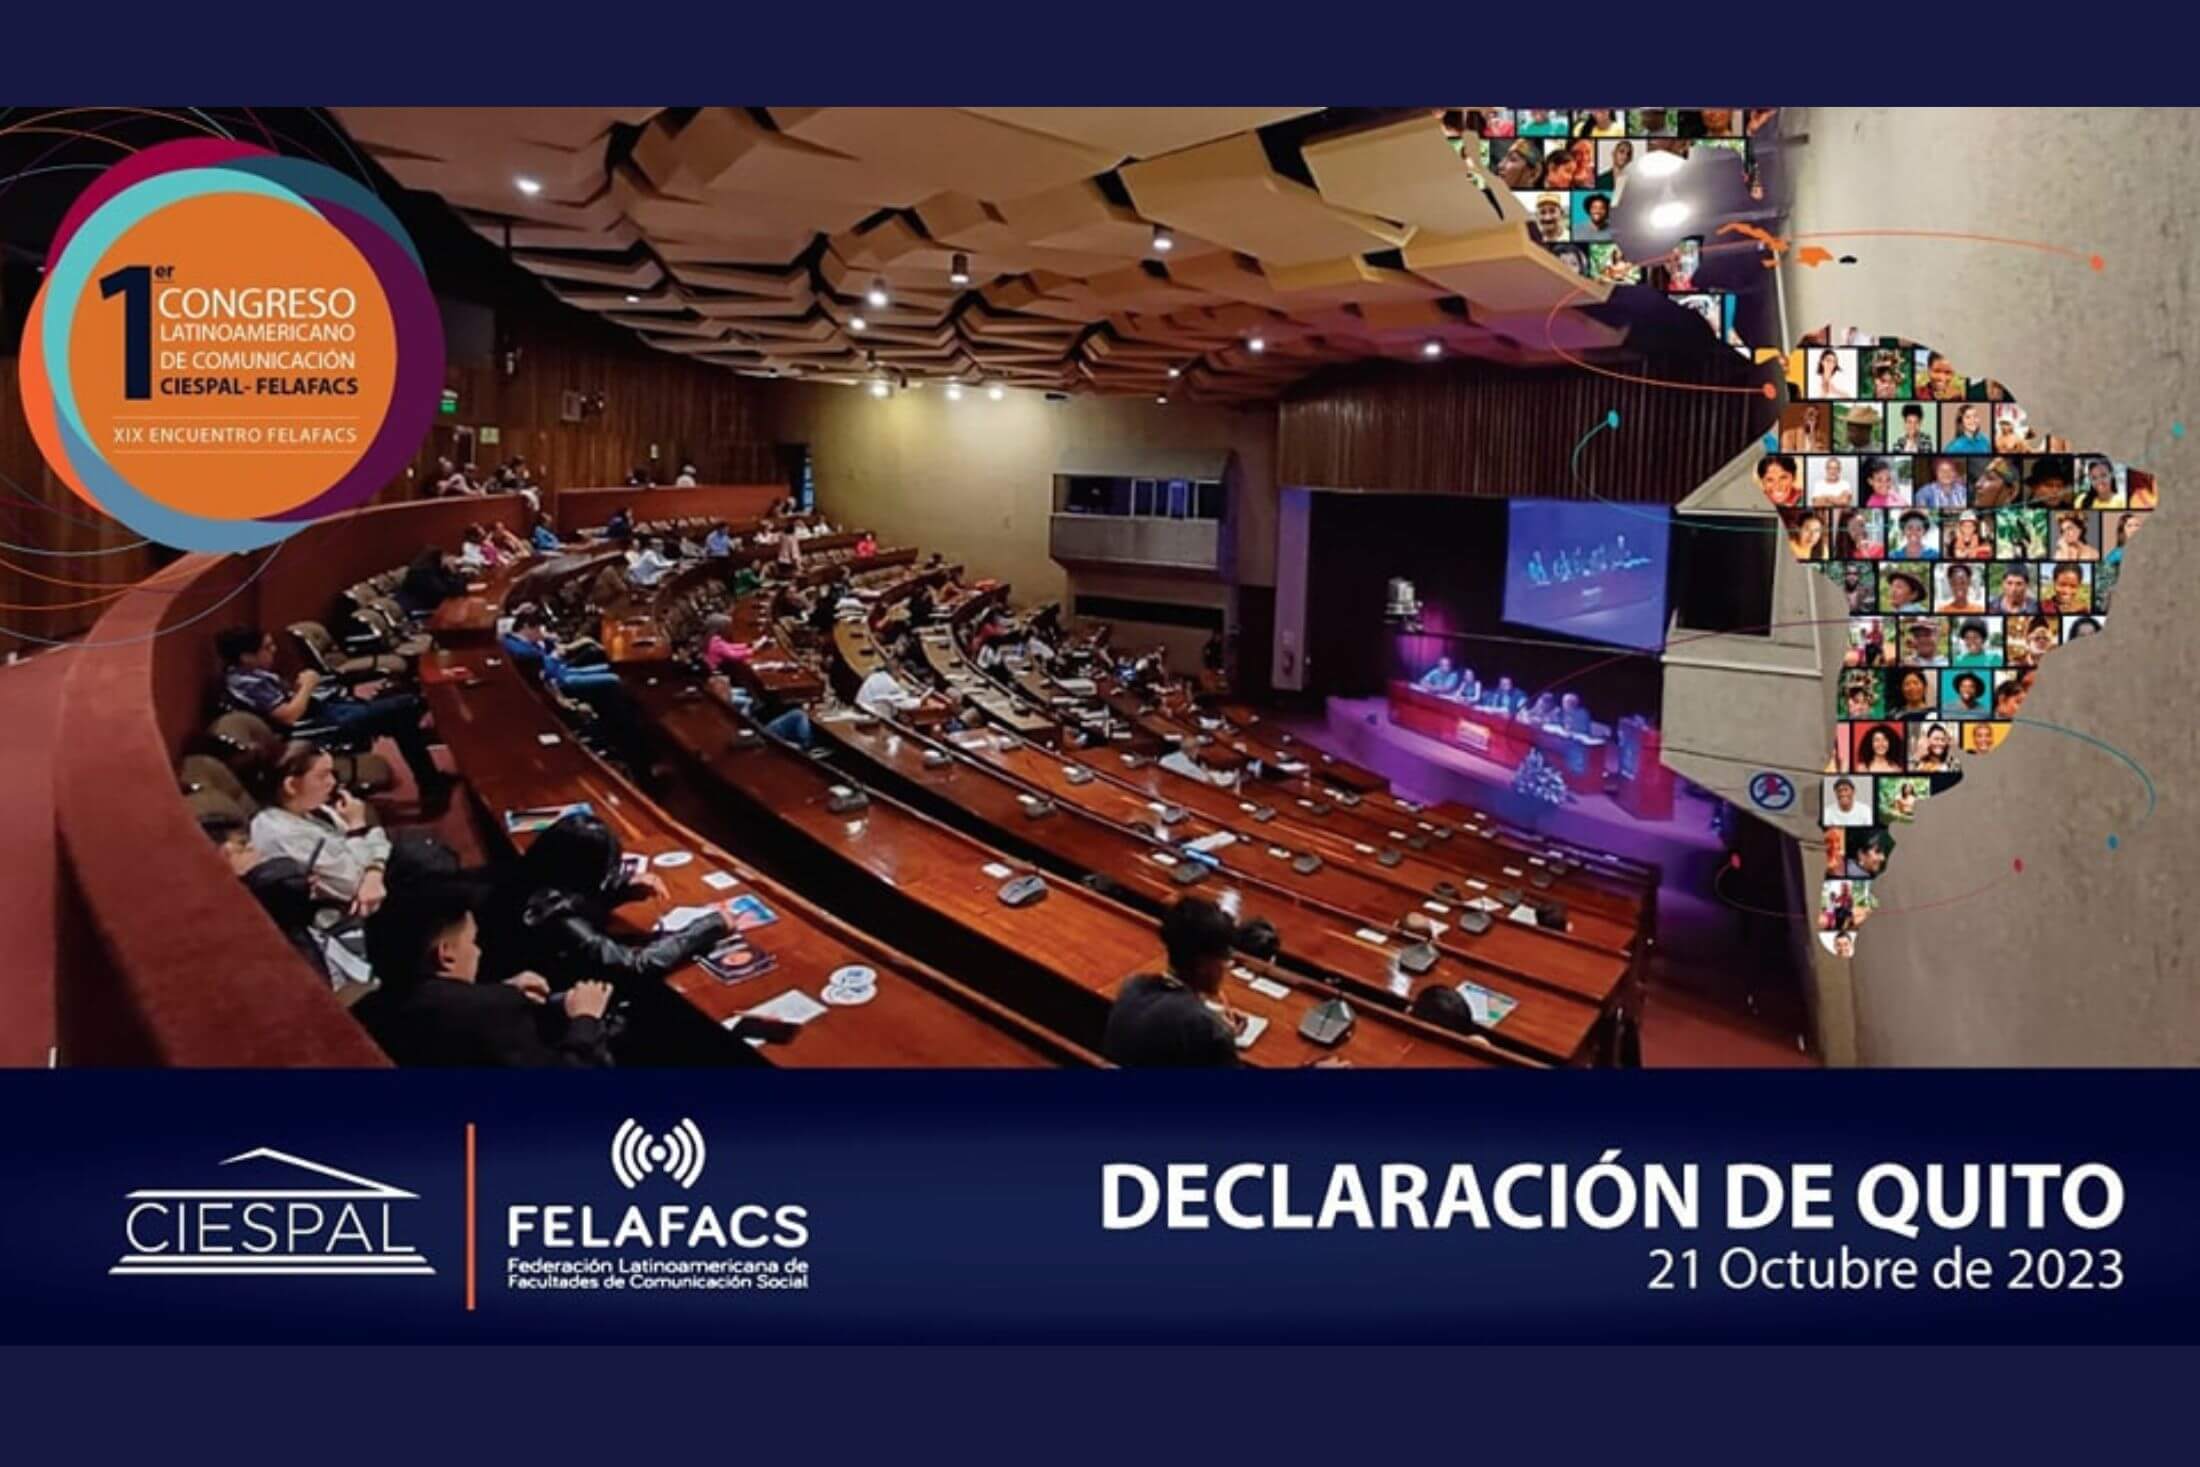 Lecture auditorium with people sitting at desk tables listening to a panel speaking on a stage. Overlay with text that read Declaracion de Quito.